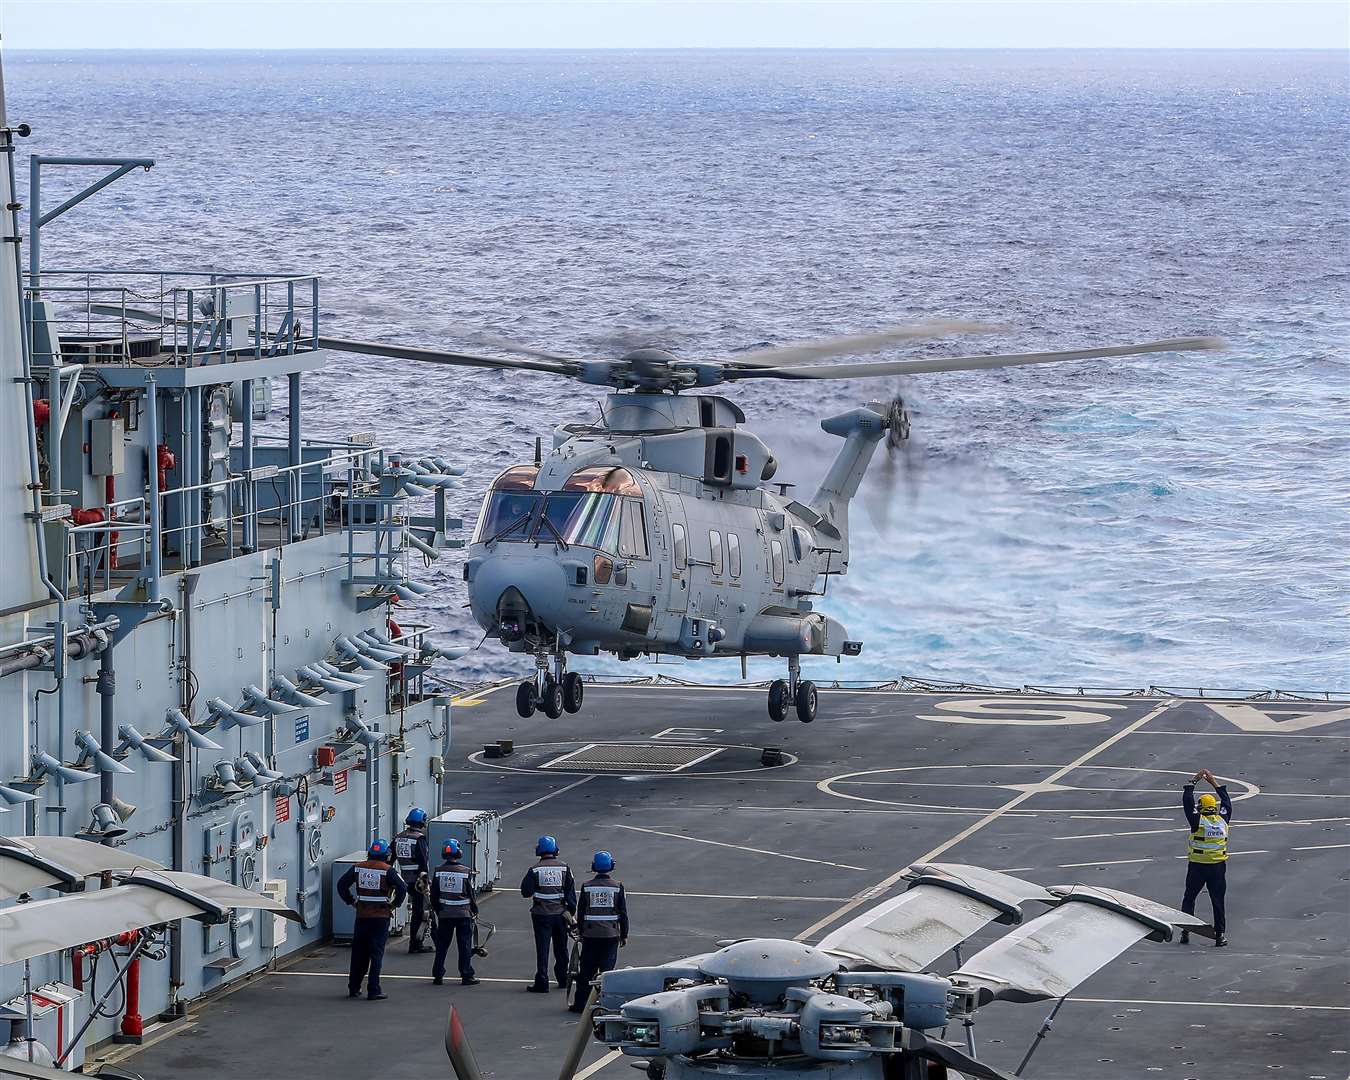 A Merlin helicopter from 845 Naval Air Squadron lifting off from RFA Argus (LPhot Oates/Royal Navy/PA)